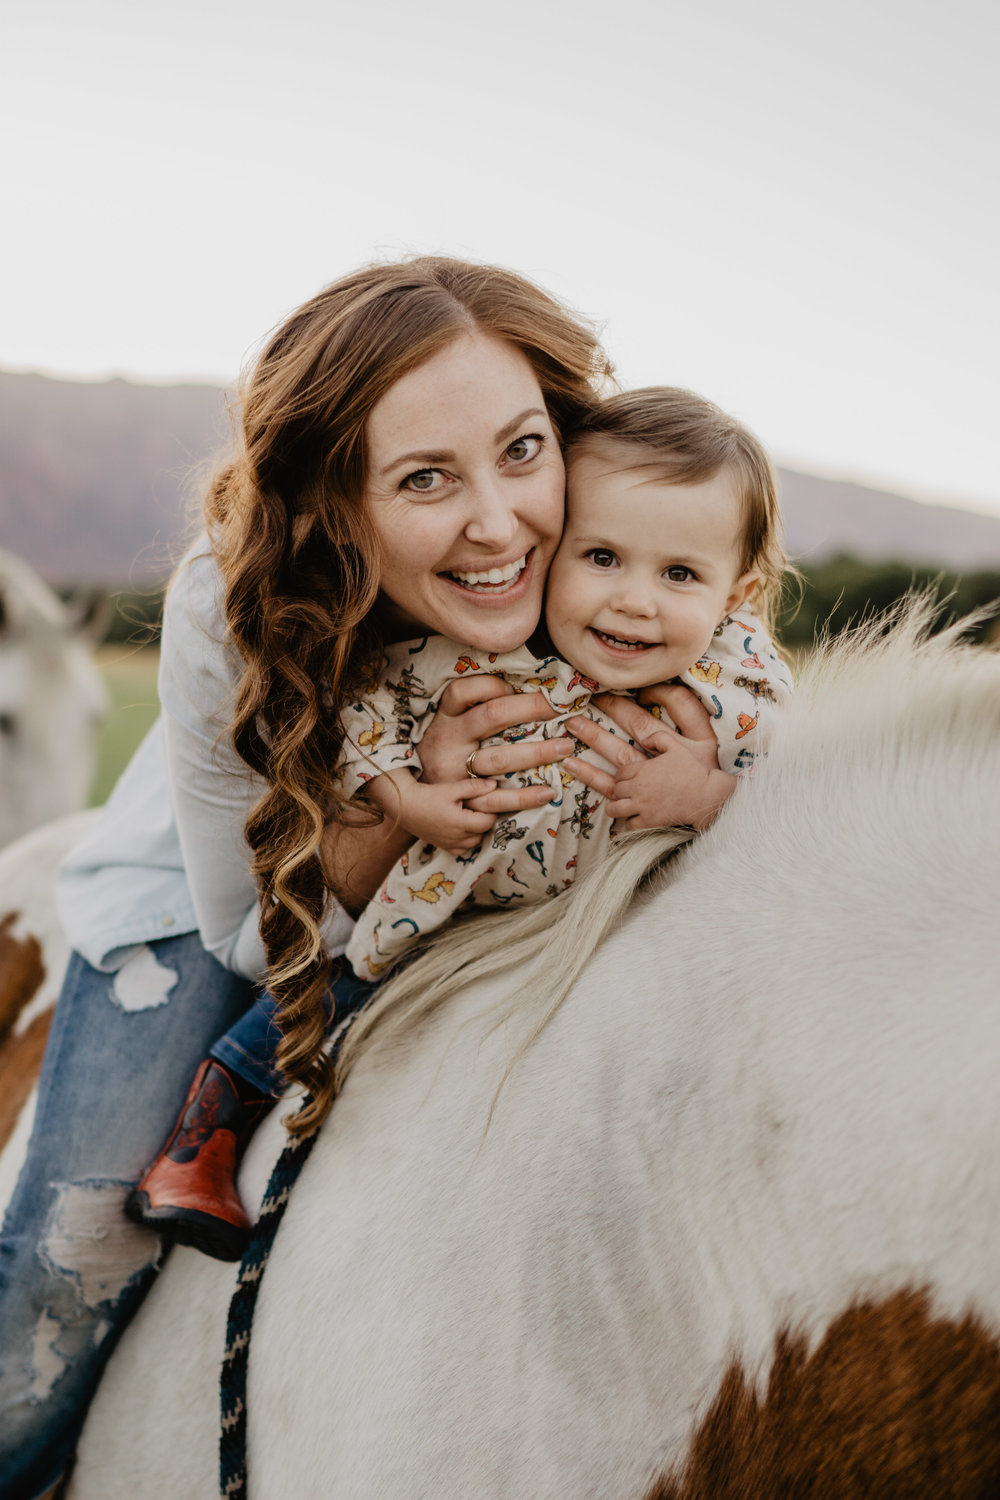 mother and young child on a horse together smiling